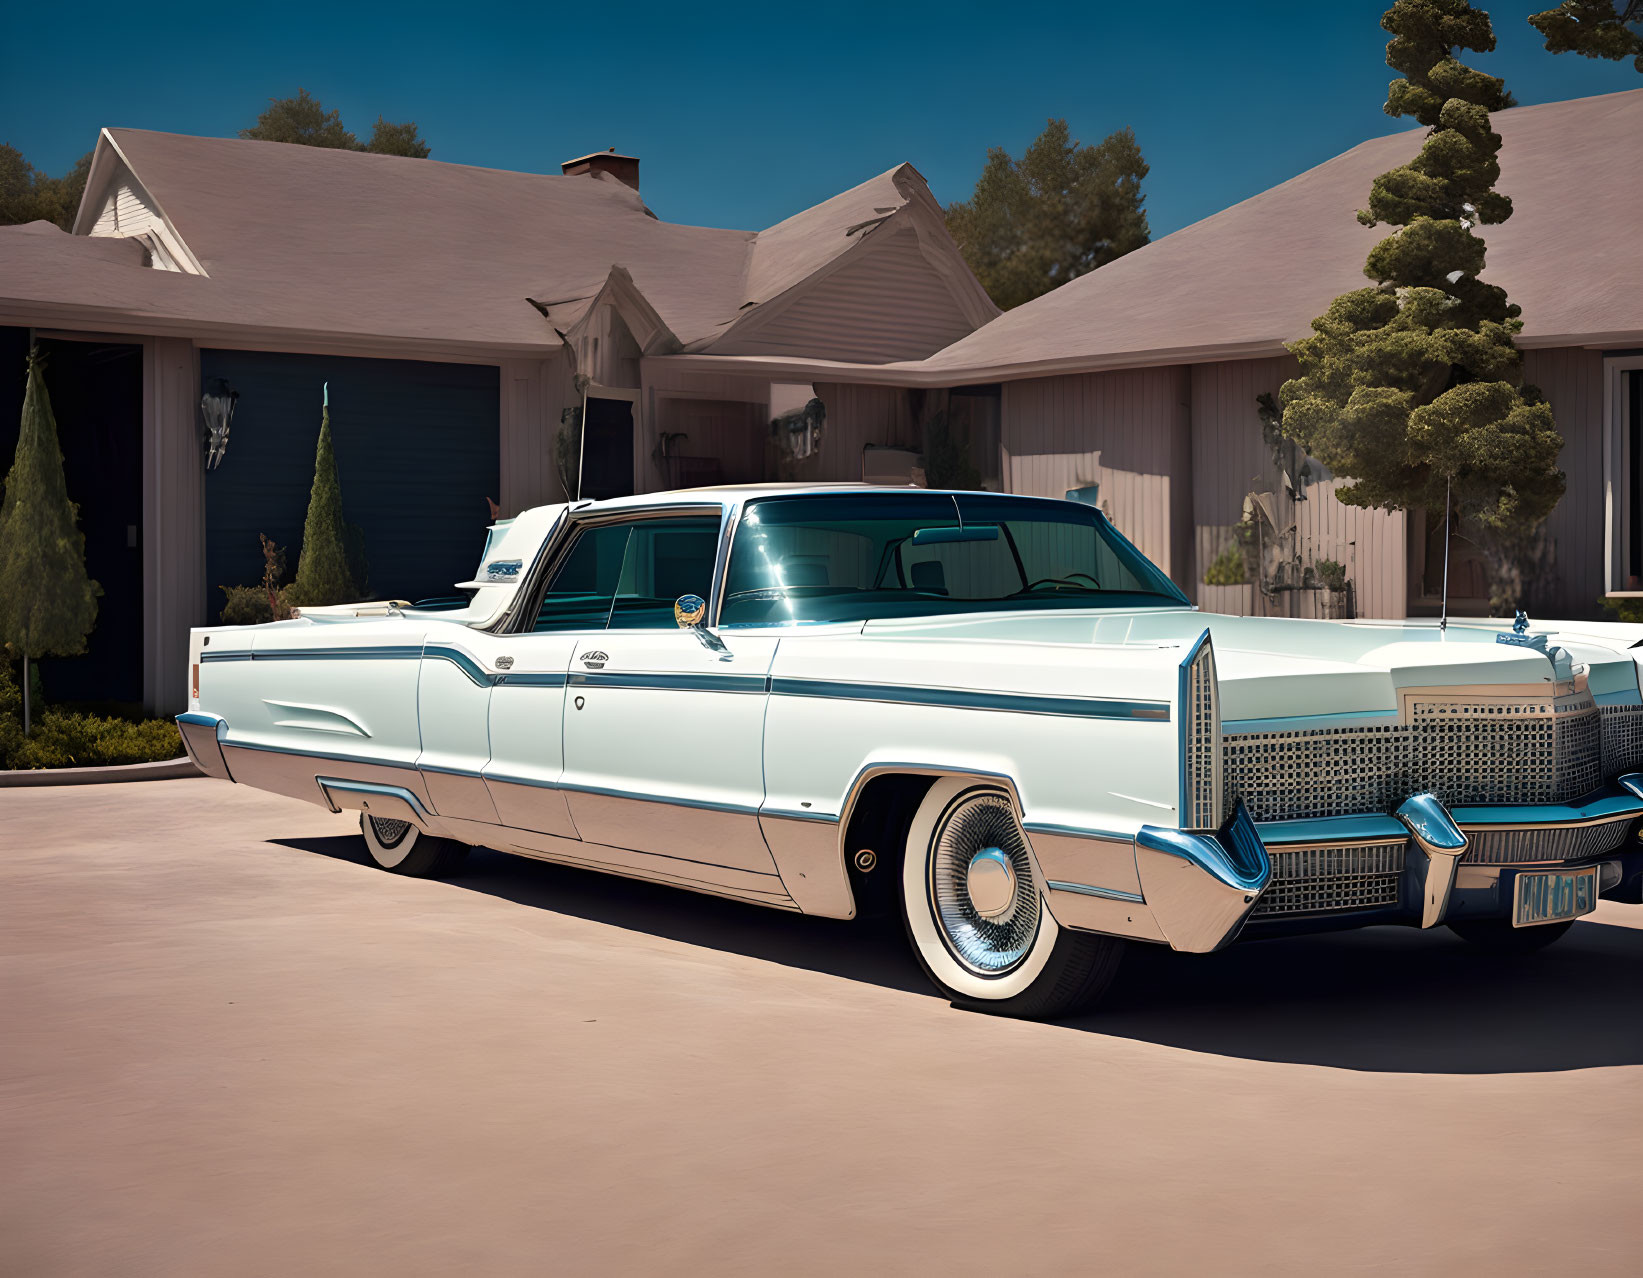 Vintage white Cadillac parked in front of mid-century modern house under clear skies